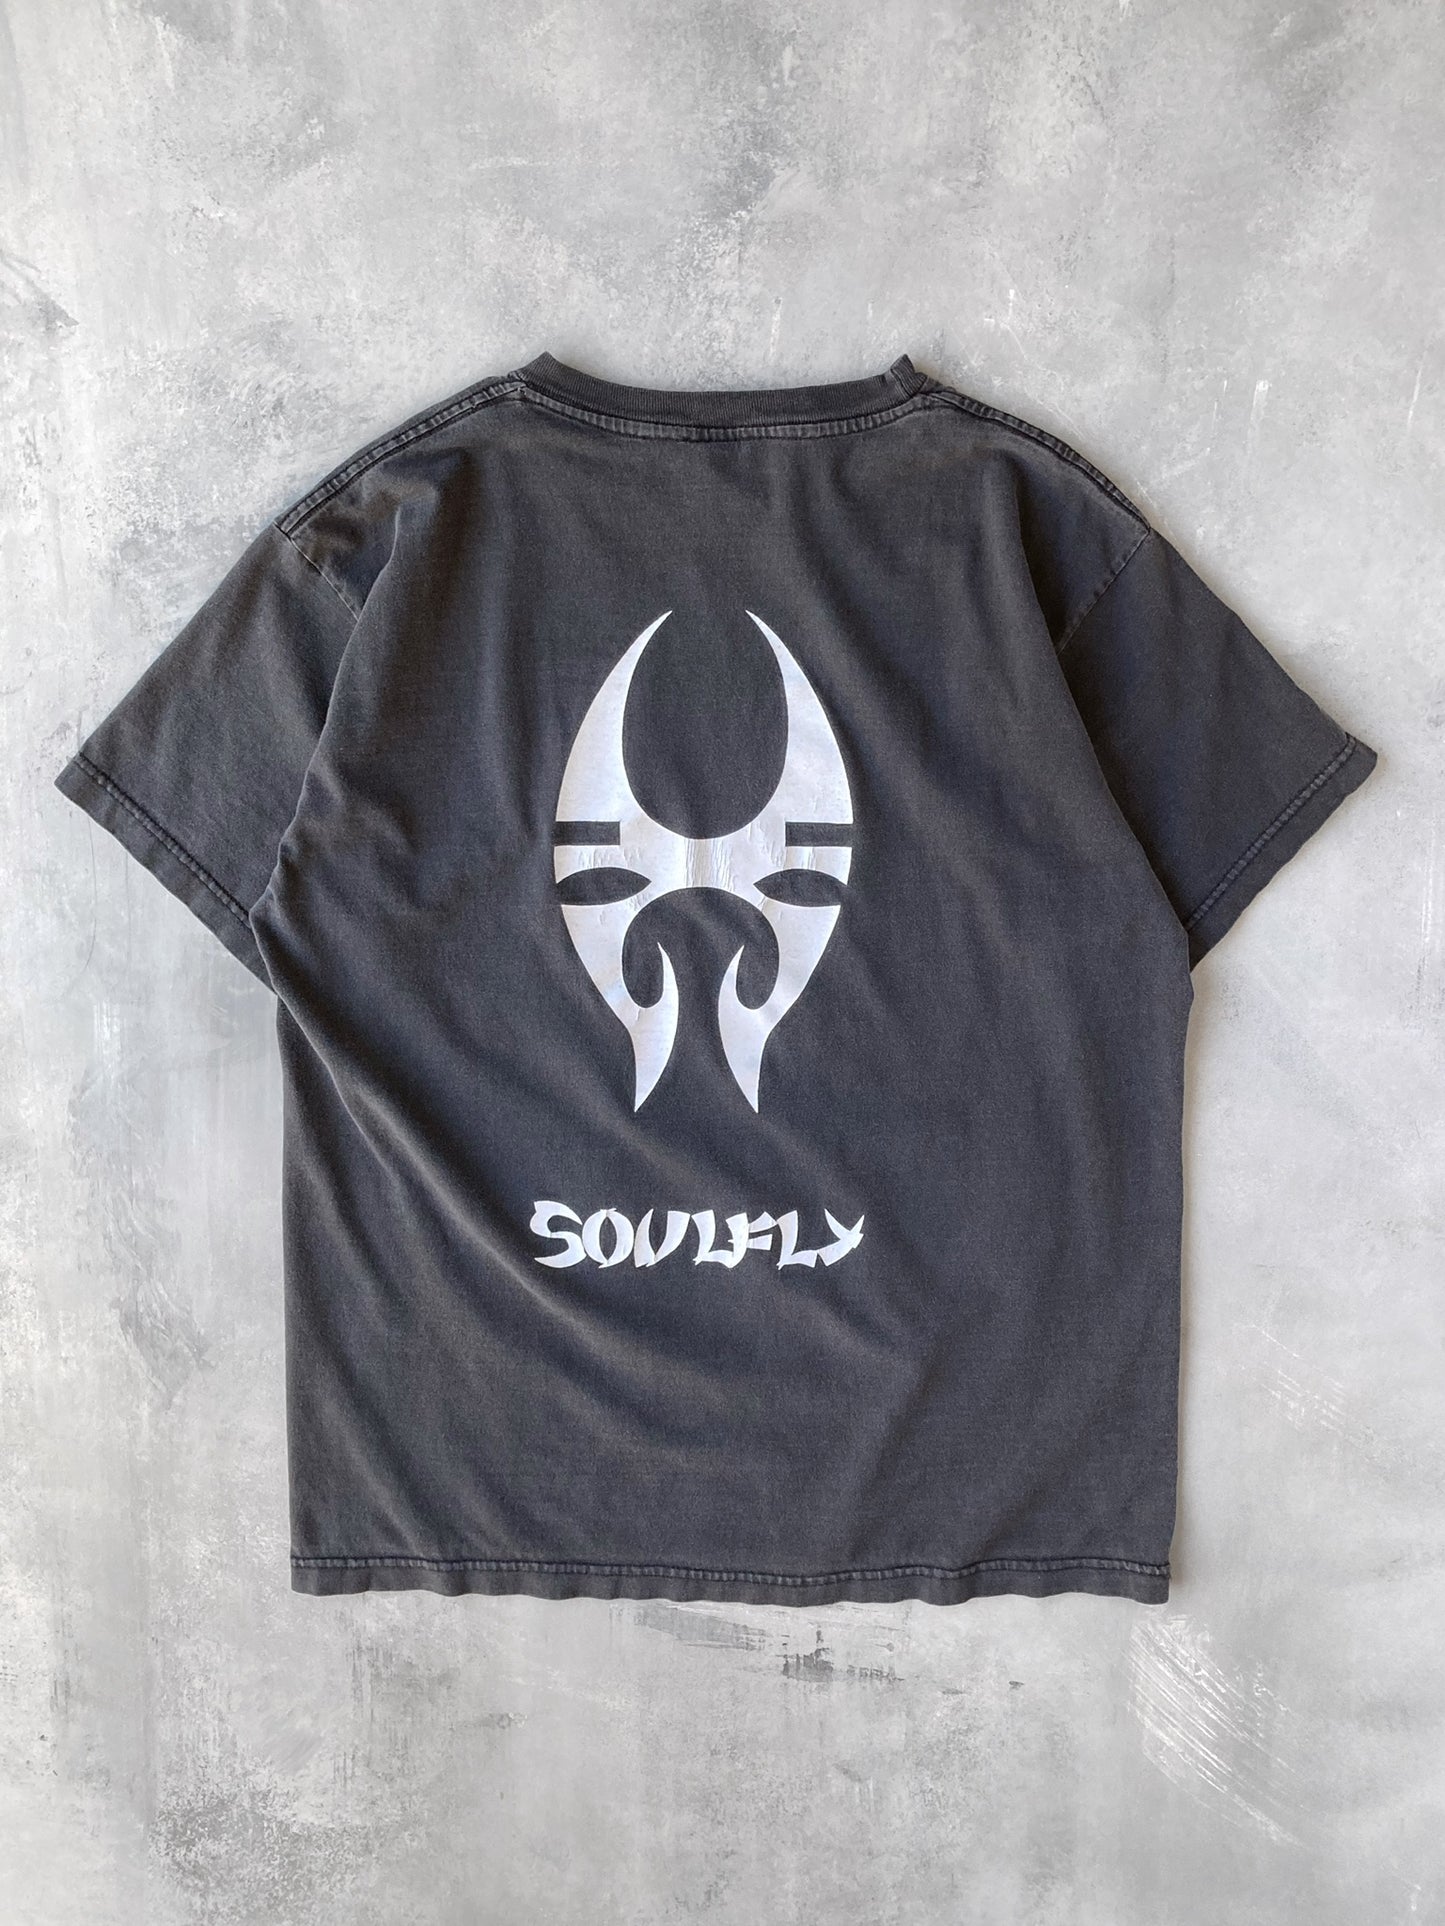 Soulfly T-Shirt '98 - Large